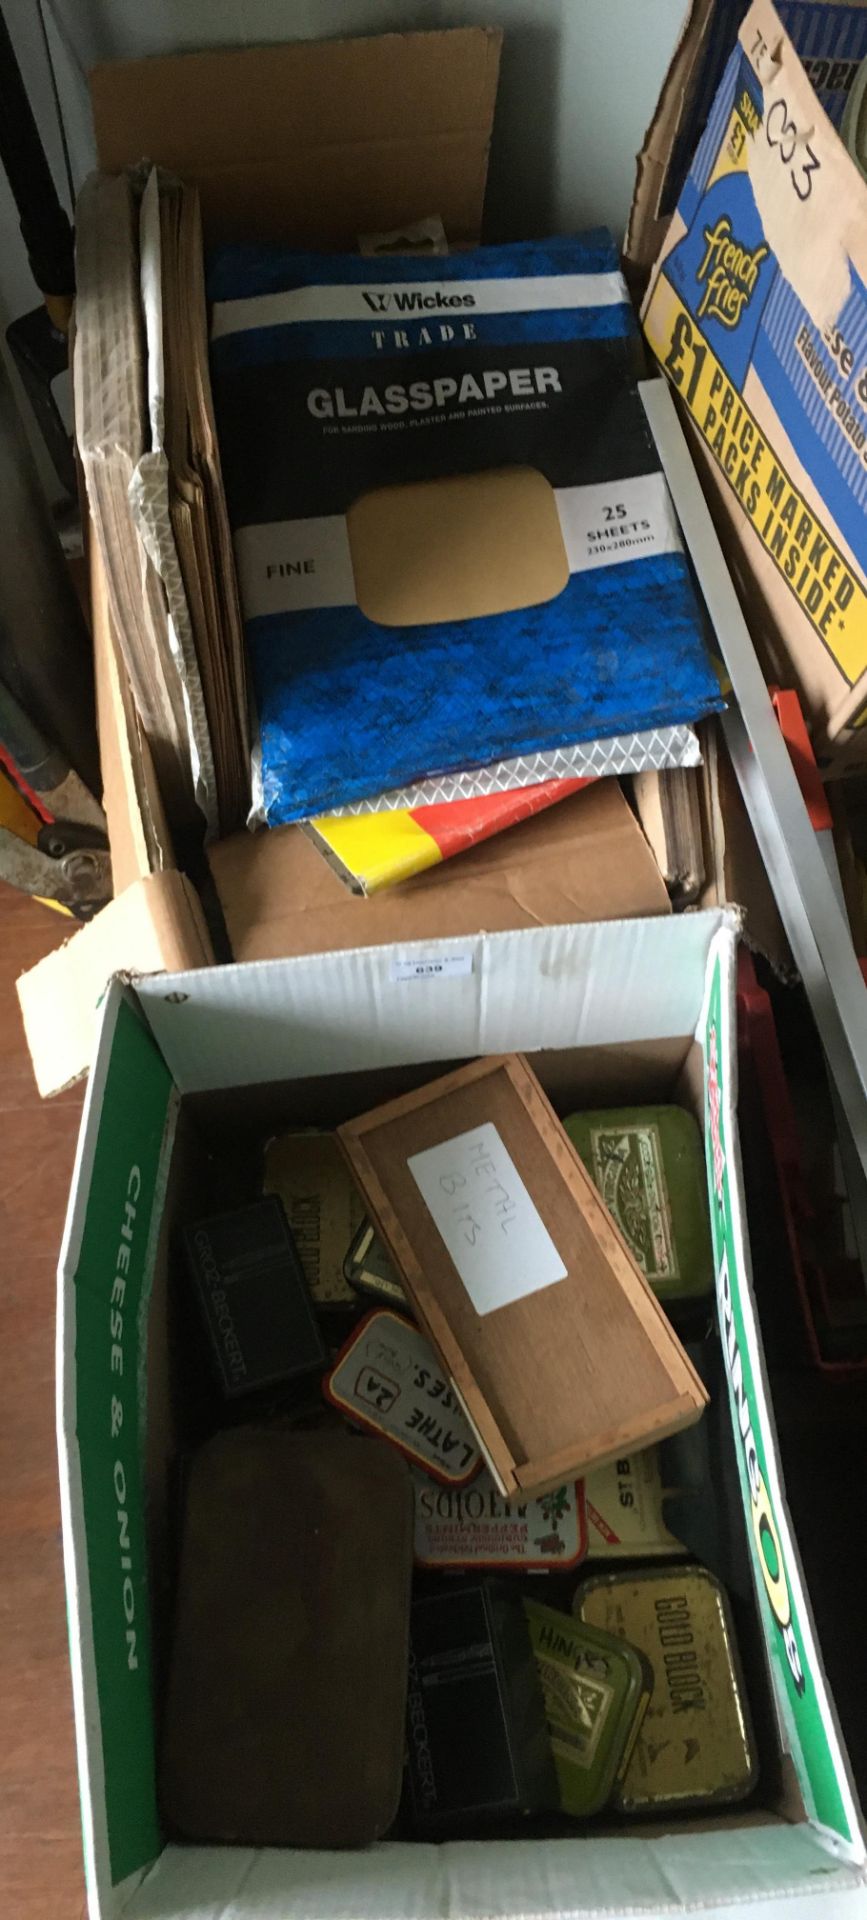 Contents to two boxes - sand paper, sanding discs, boxes of hinges, pressure gauges etc.